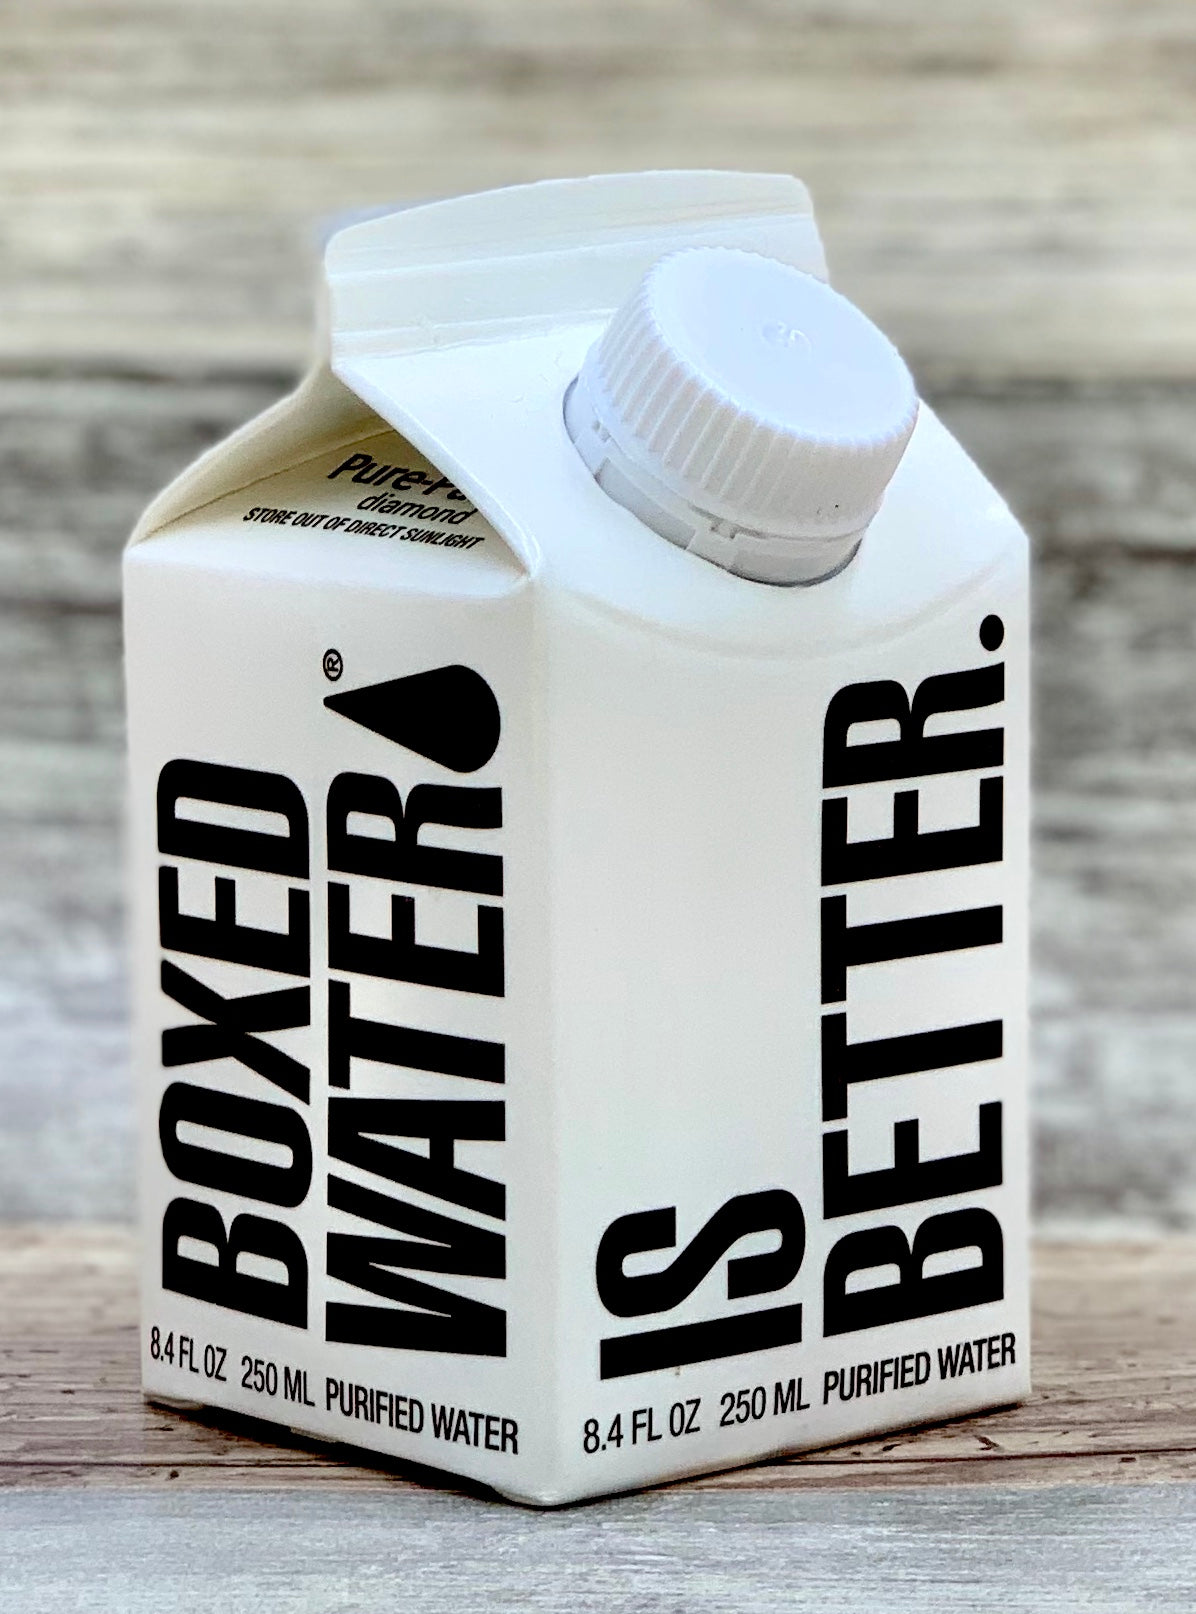 BOXED WATER IS BETTER